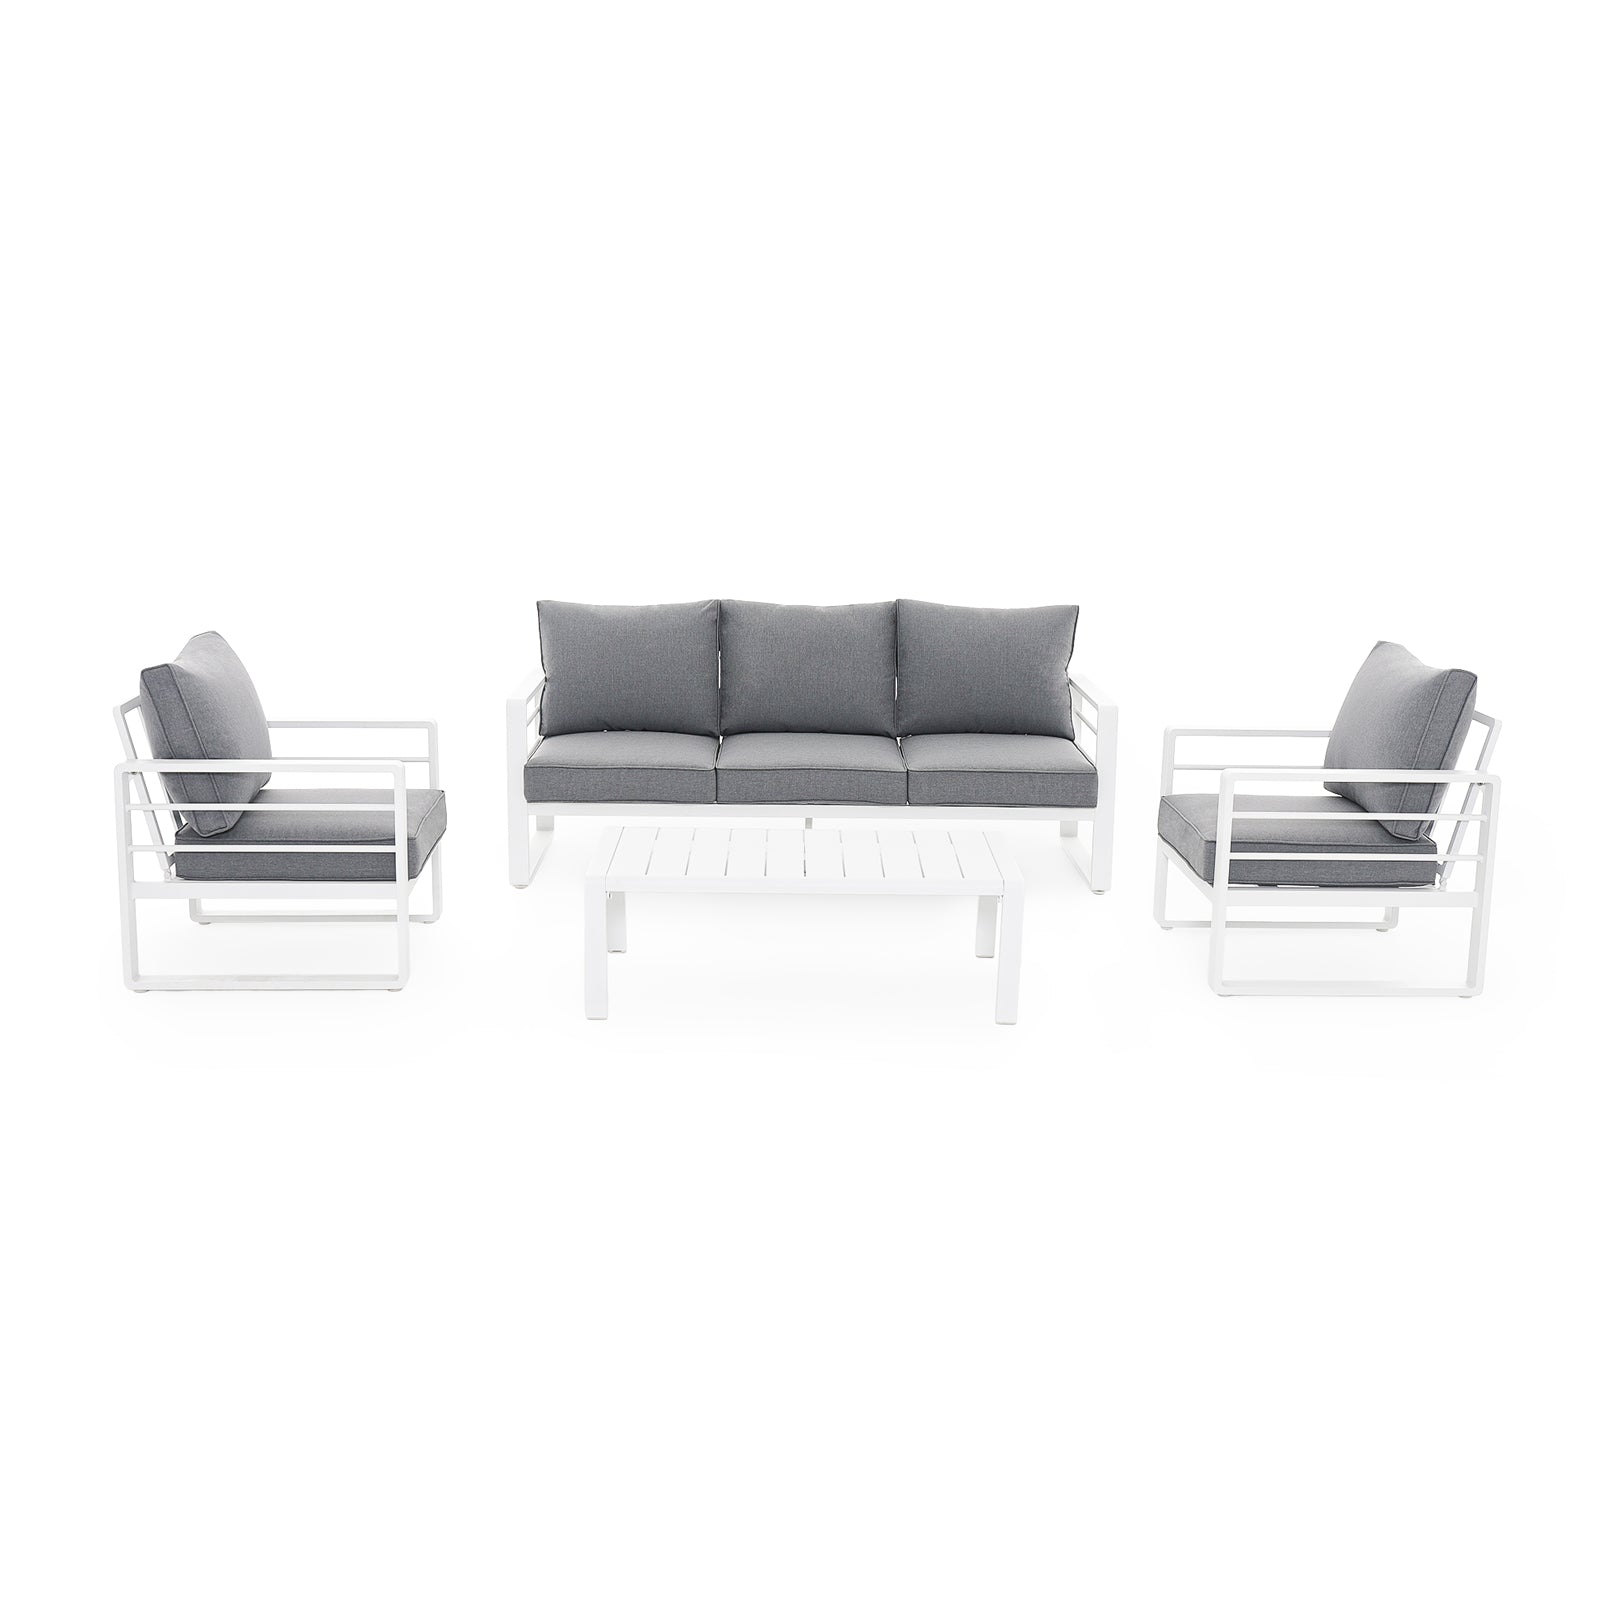 Salina Modern White Aluminum Outdoor Sofa Set with Grey Cushions, a 3-seater sofa, 2 armchairs, 1 rectangle coffee table, front view - Jardina Furniture